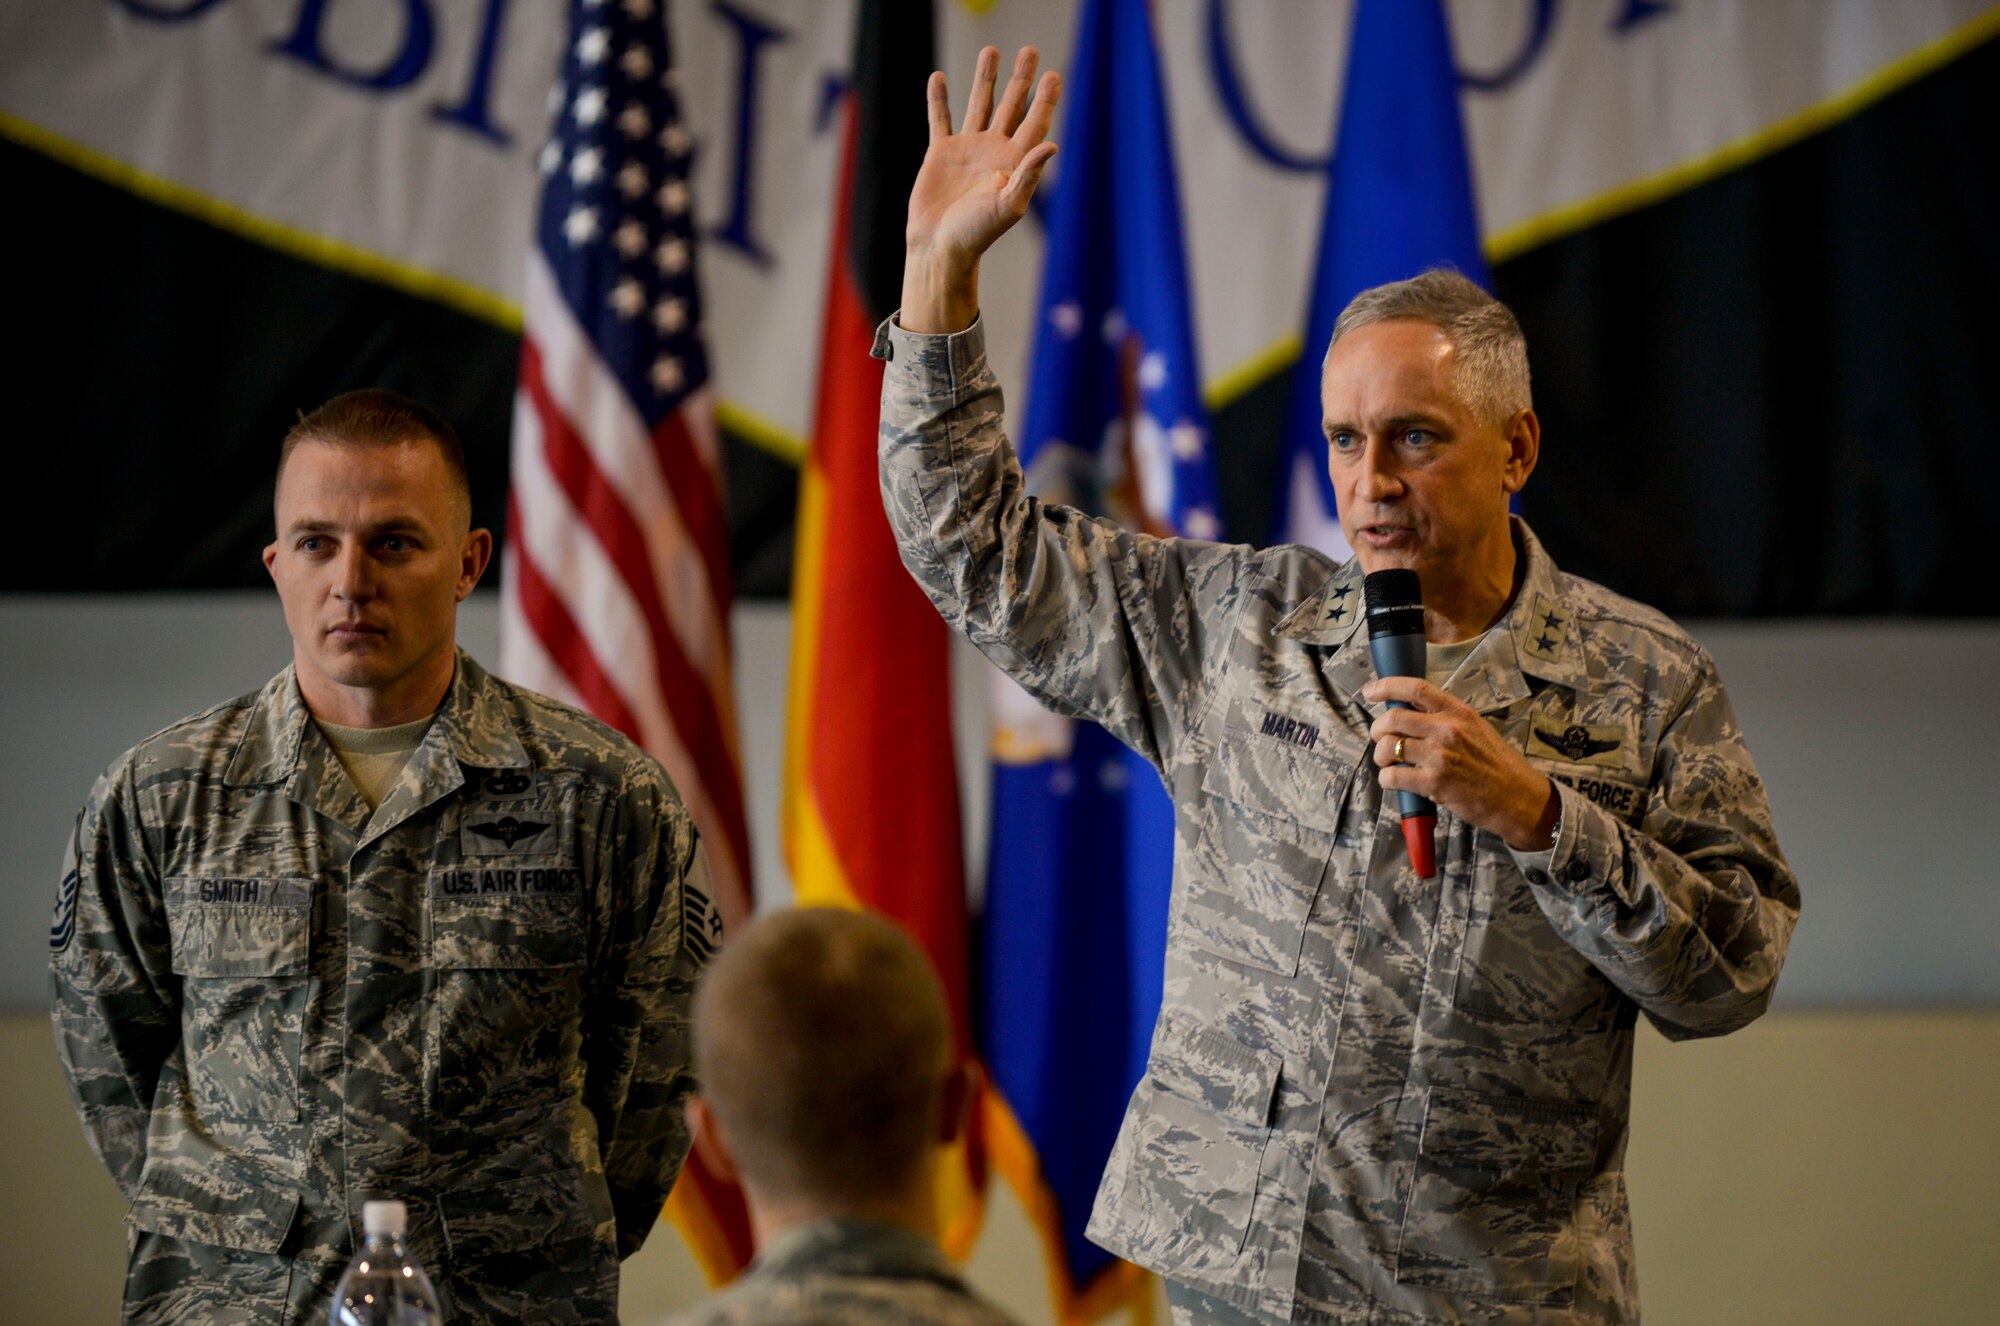 Maj. Gen. Frederick H. Rick Martin, U.S. Air Force Expeditionary Center commander, speaks during an all-call Oct. 13, 2015, at Ramstein Air Base, Germany. During the all-call, Martin spoke to Airmen about the future of the Air Force and commended them for their impact on the Air Mobility Command mission. (U.S. Air Force photo/Senior Airman Nicole Sikorski)